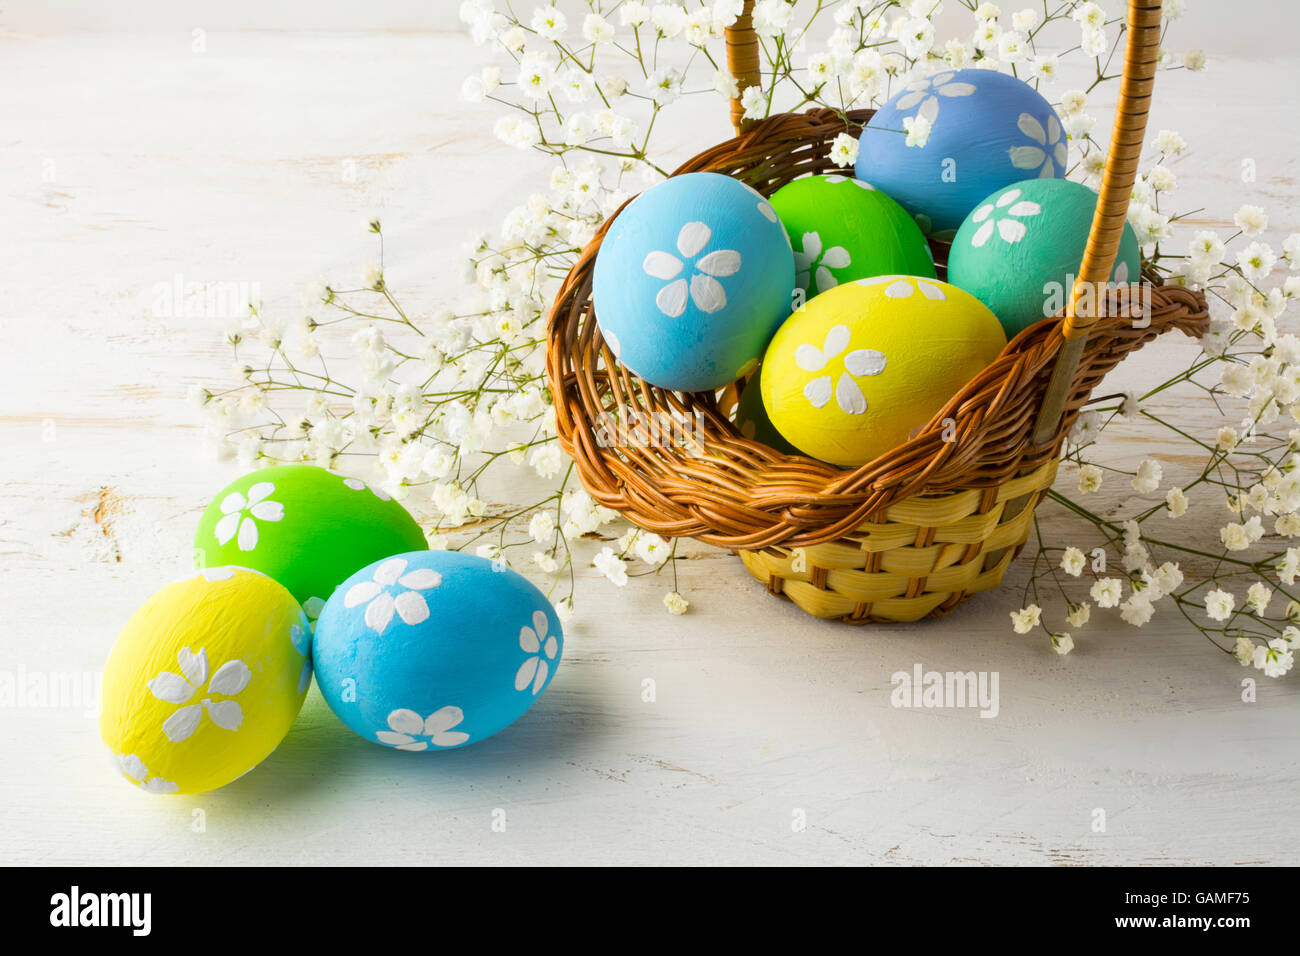 Hand-painted decorated Easter eggs in the basket with small white baby's breath flowers on a white wooden background, close up Stock Photo